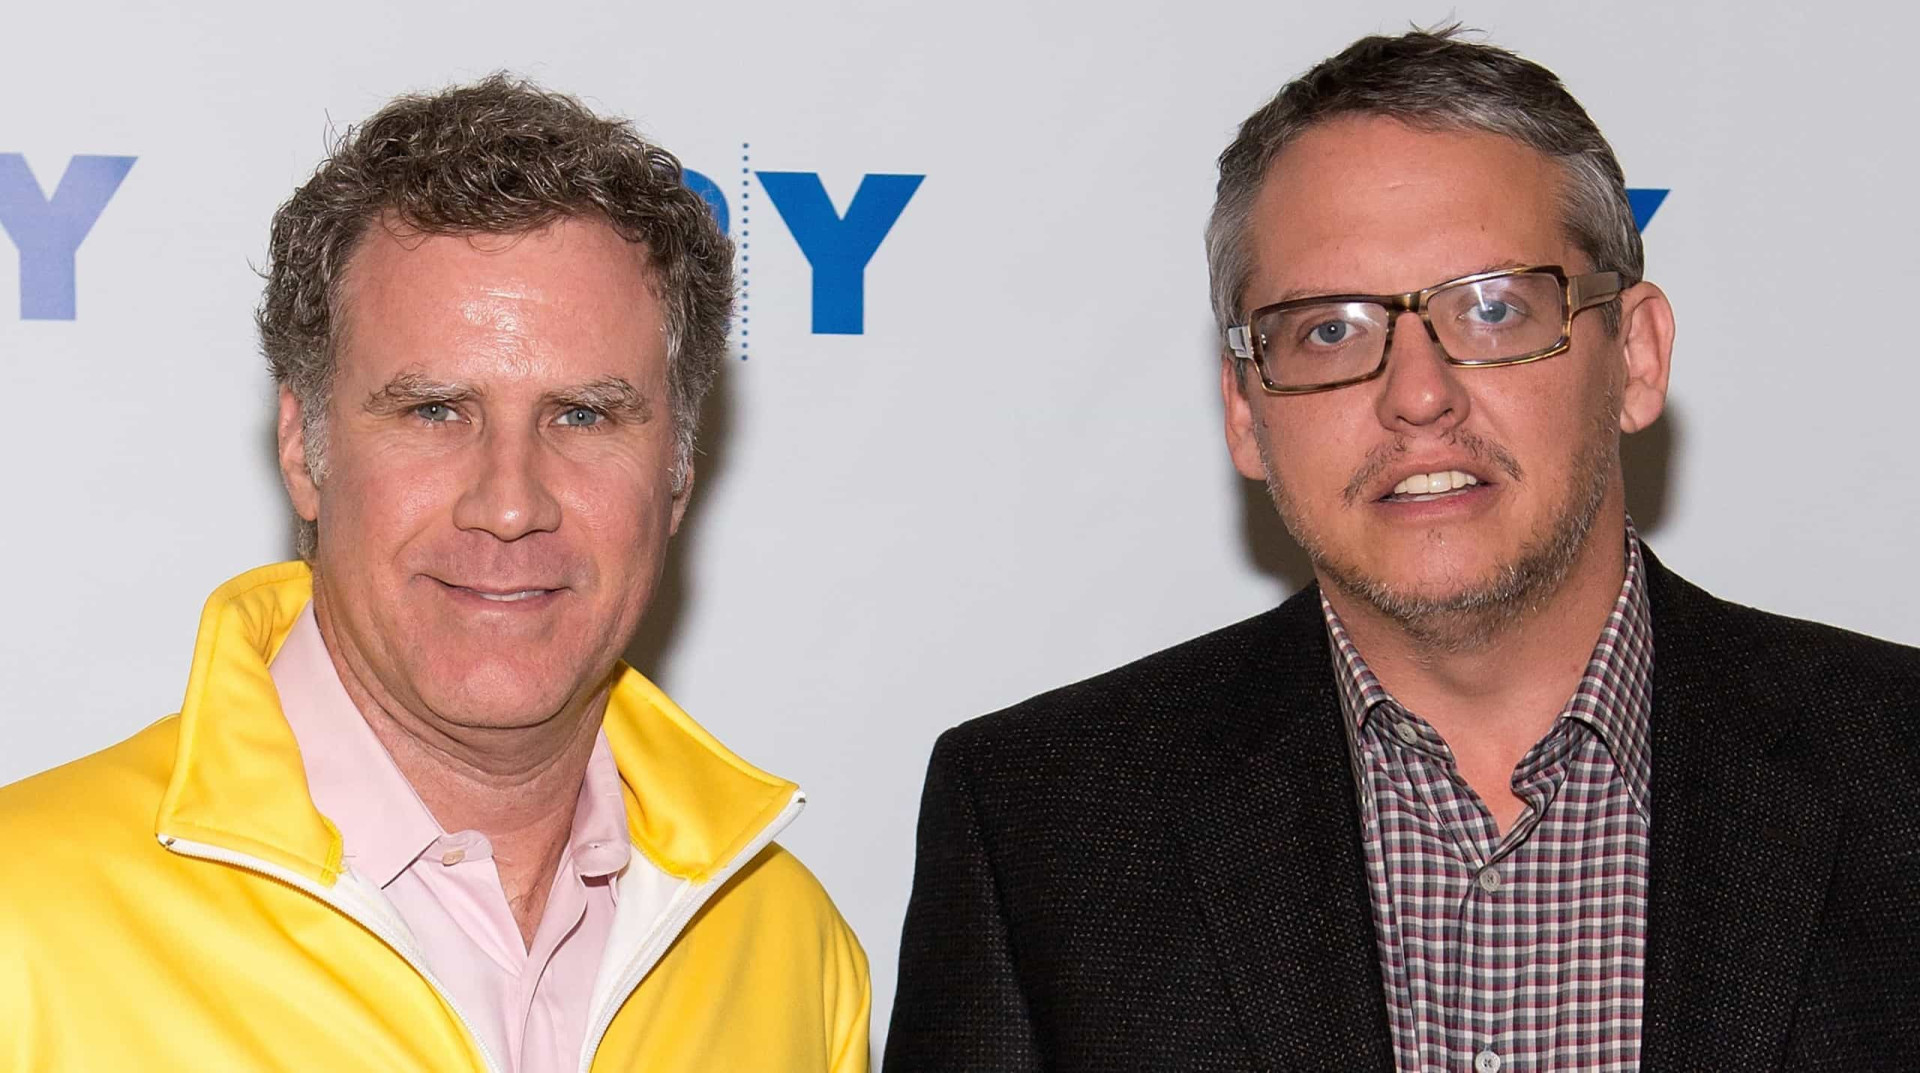 <p>Will Ferrell and Adam McKay had a successful comedic partnership spanning more than 20 years, collaborating on popular films such as 'Anchorman,' 'Step Brothers,' and 'Talladega Nights.' In April 2019, they announced the end of their joint production company, Gloria Sanchez Productions, attributing it to McKay's increased capacity for producing. However, it seems there was more to the story, as Ferrell has completely severed ties with McKay.<br><br>In an interview with Vanity Fair, McKay disclosed that their relationship reached its breaking point when he chose to cast John C. Reilly instead of Ferrell in his HBO drama series, without consulting Ferrell. Although McKay attempted to apologize and acknowledge his mishandling of the situation, he fears that Ferrell may never forgive him or speak to him again.</p><p>You may also like:<a href="https://www.starsinsider.com/n/455952?utm_source=msn.com&utm_medium=display&utm_campaign=referral_description&utm_content=570915en-en"> Celebs who never knew their father</a></p>